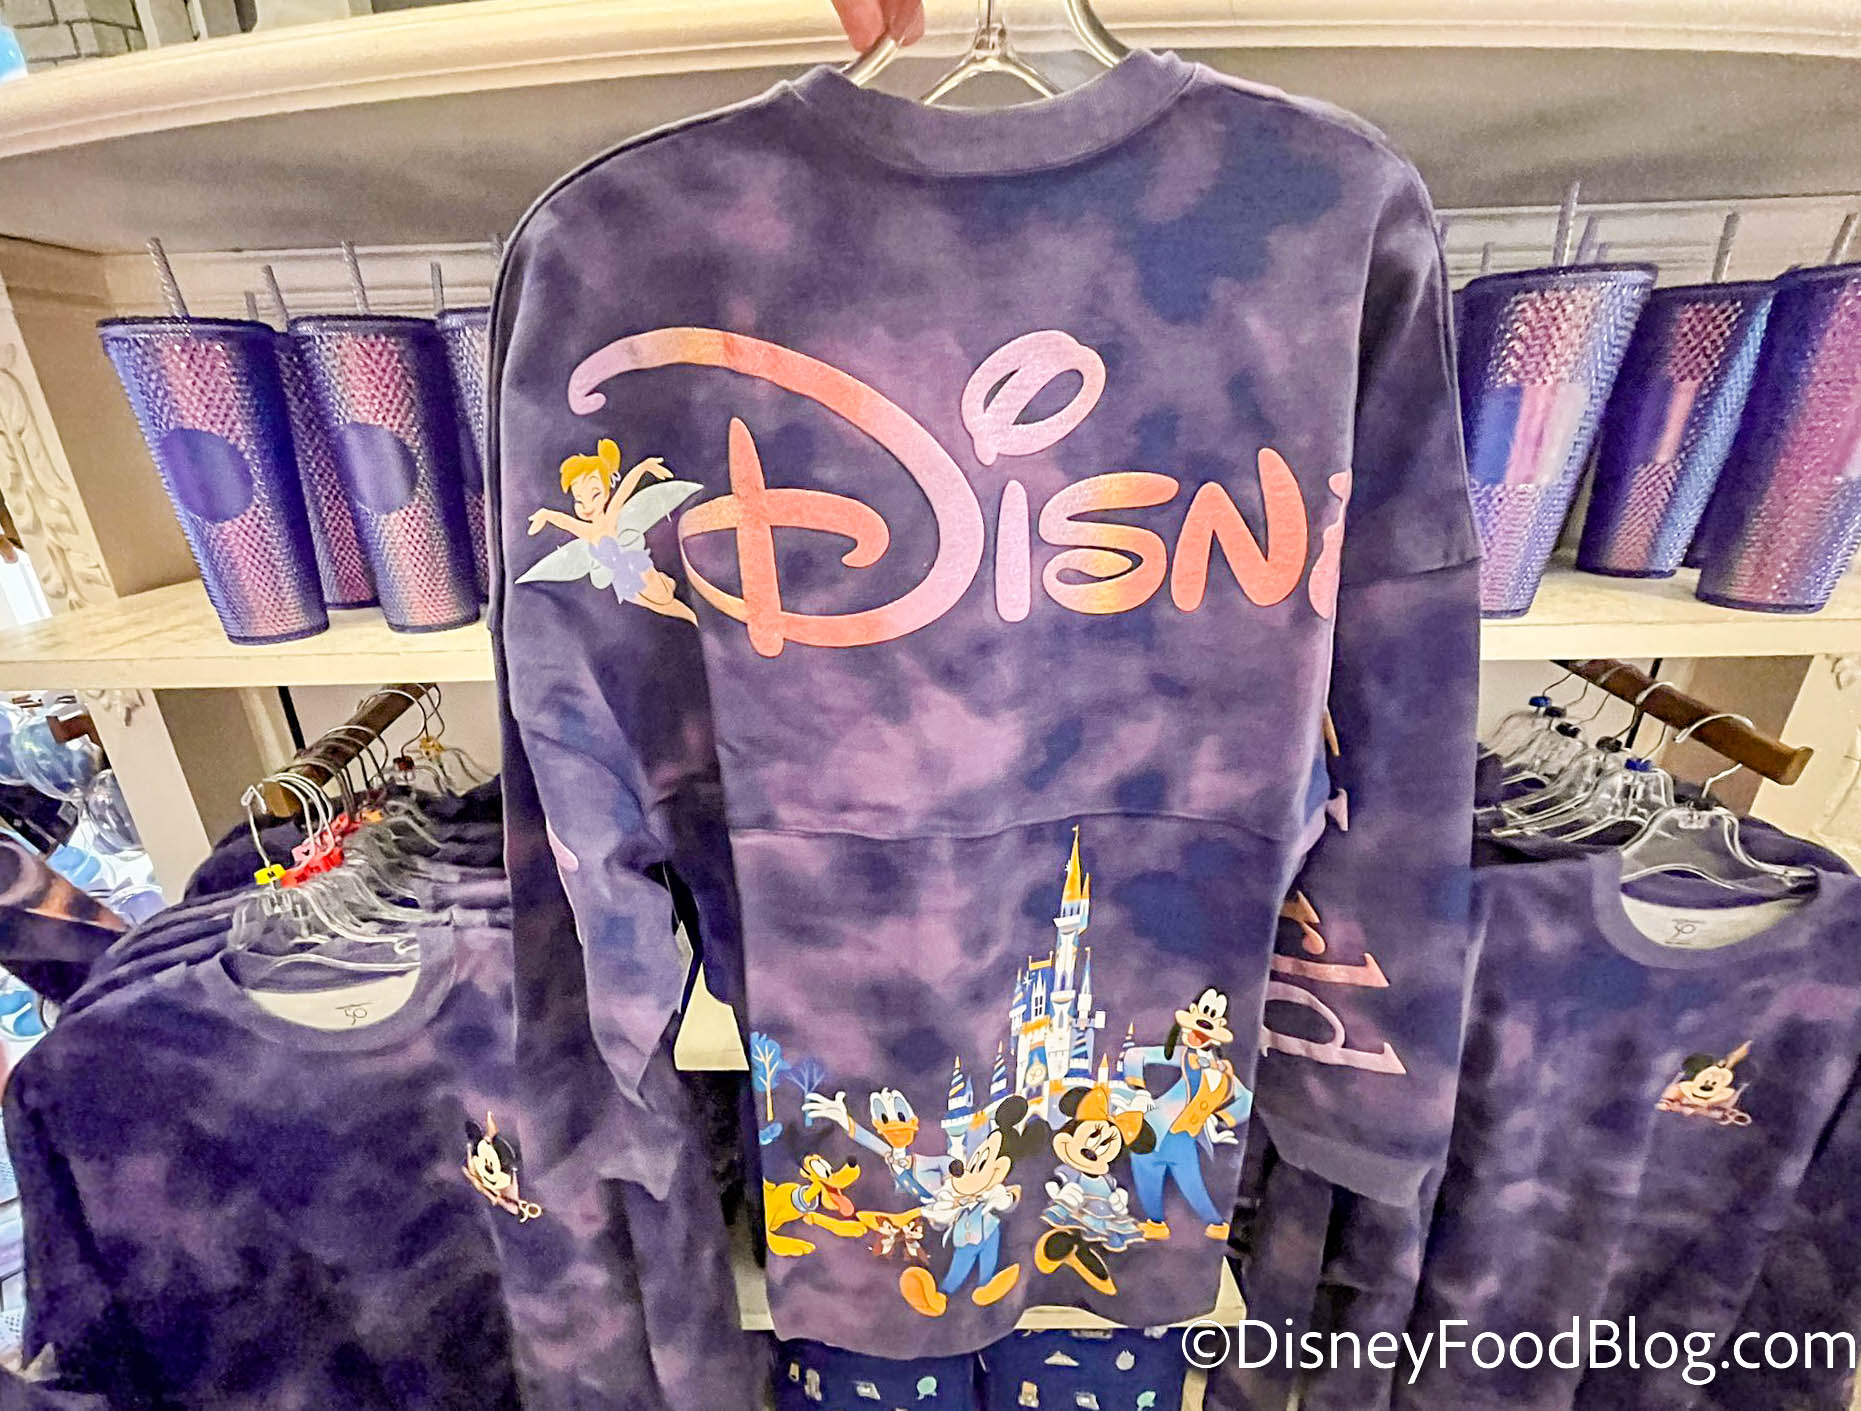 Find Out Where to Buy the NEW Tie-Dye Spirit Jersey in Disney